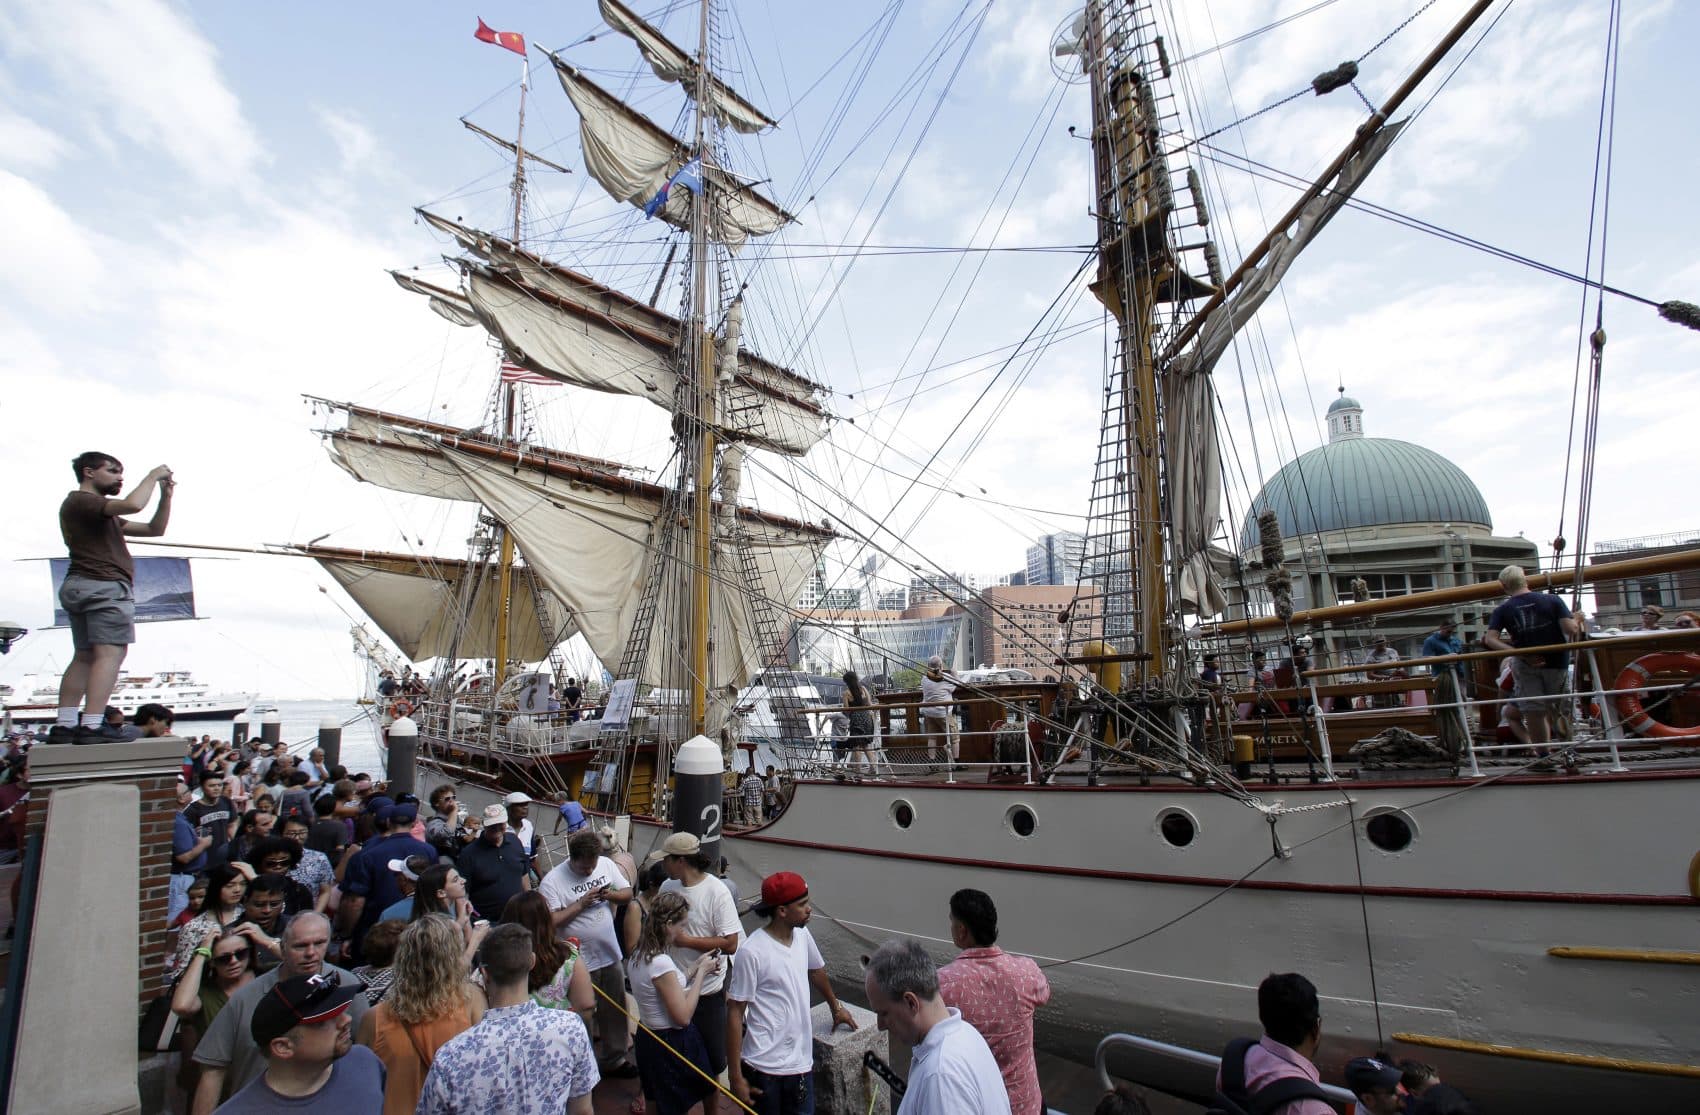 Crowds make their way past the Europa, a tall ship registered in the Netherlands during Sail Boston on Sunday. (Steven Senne/AP)